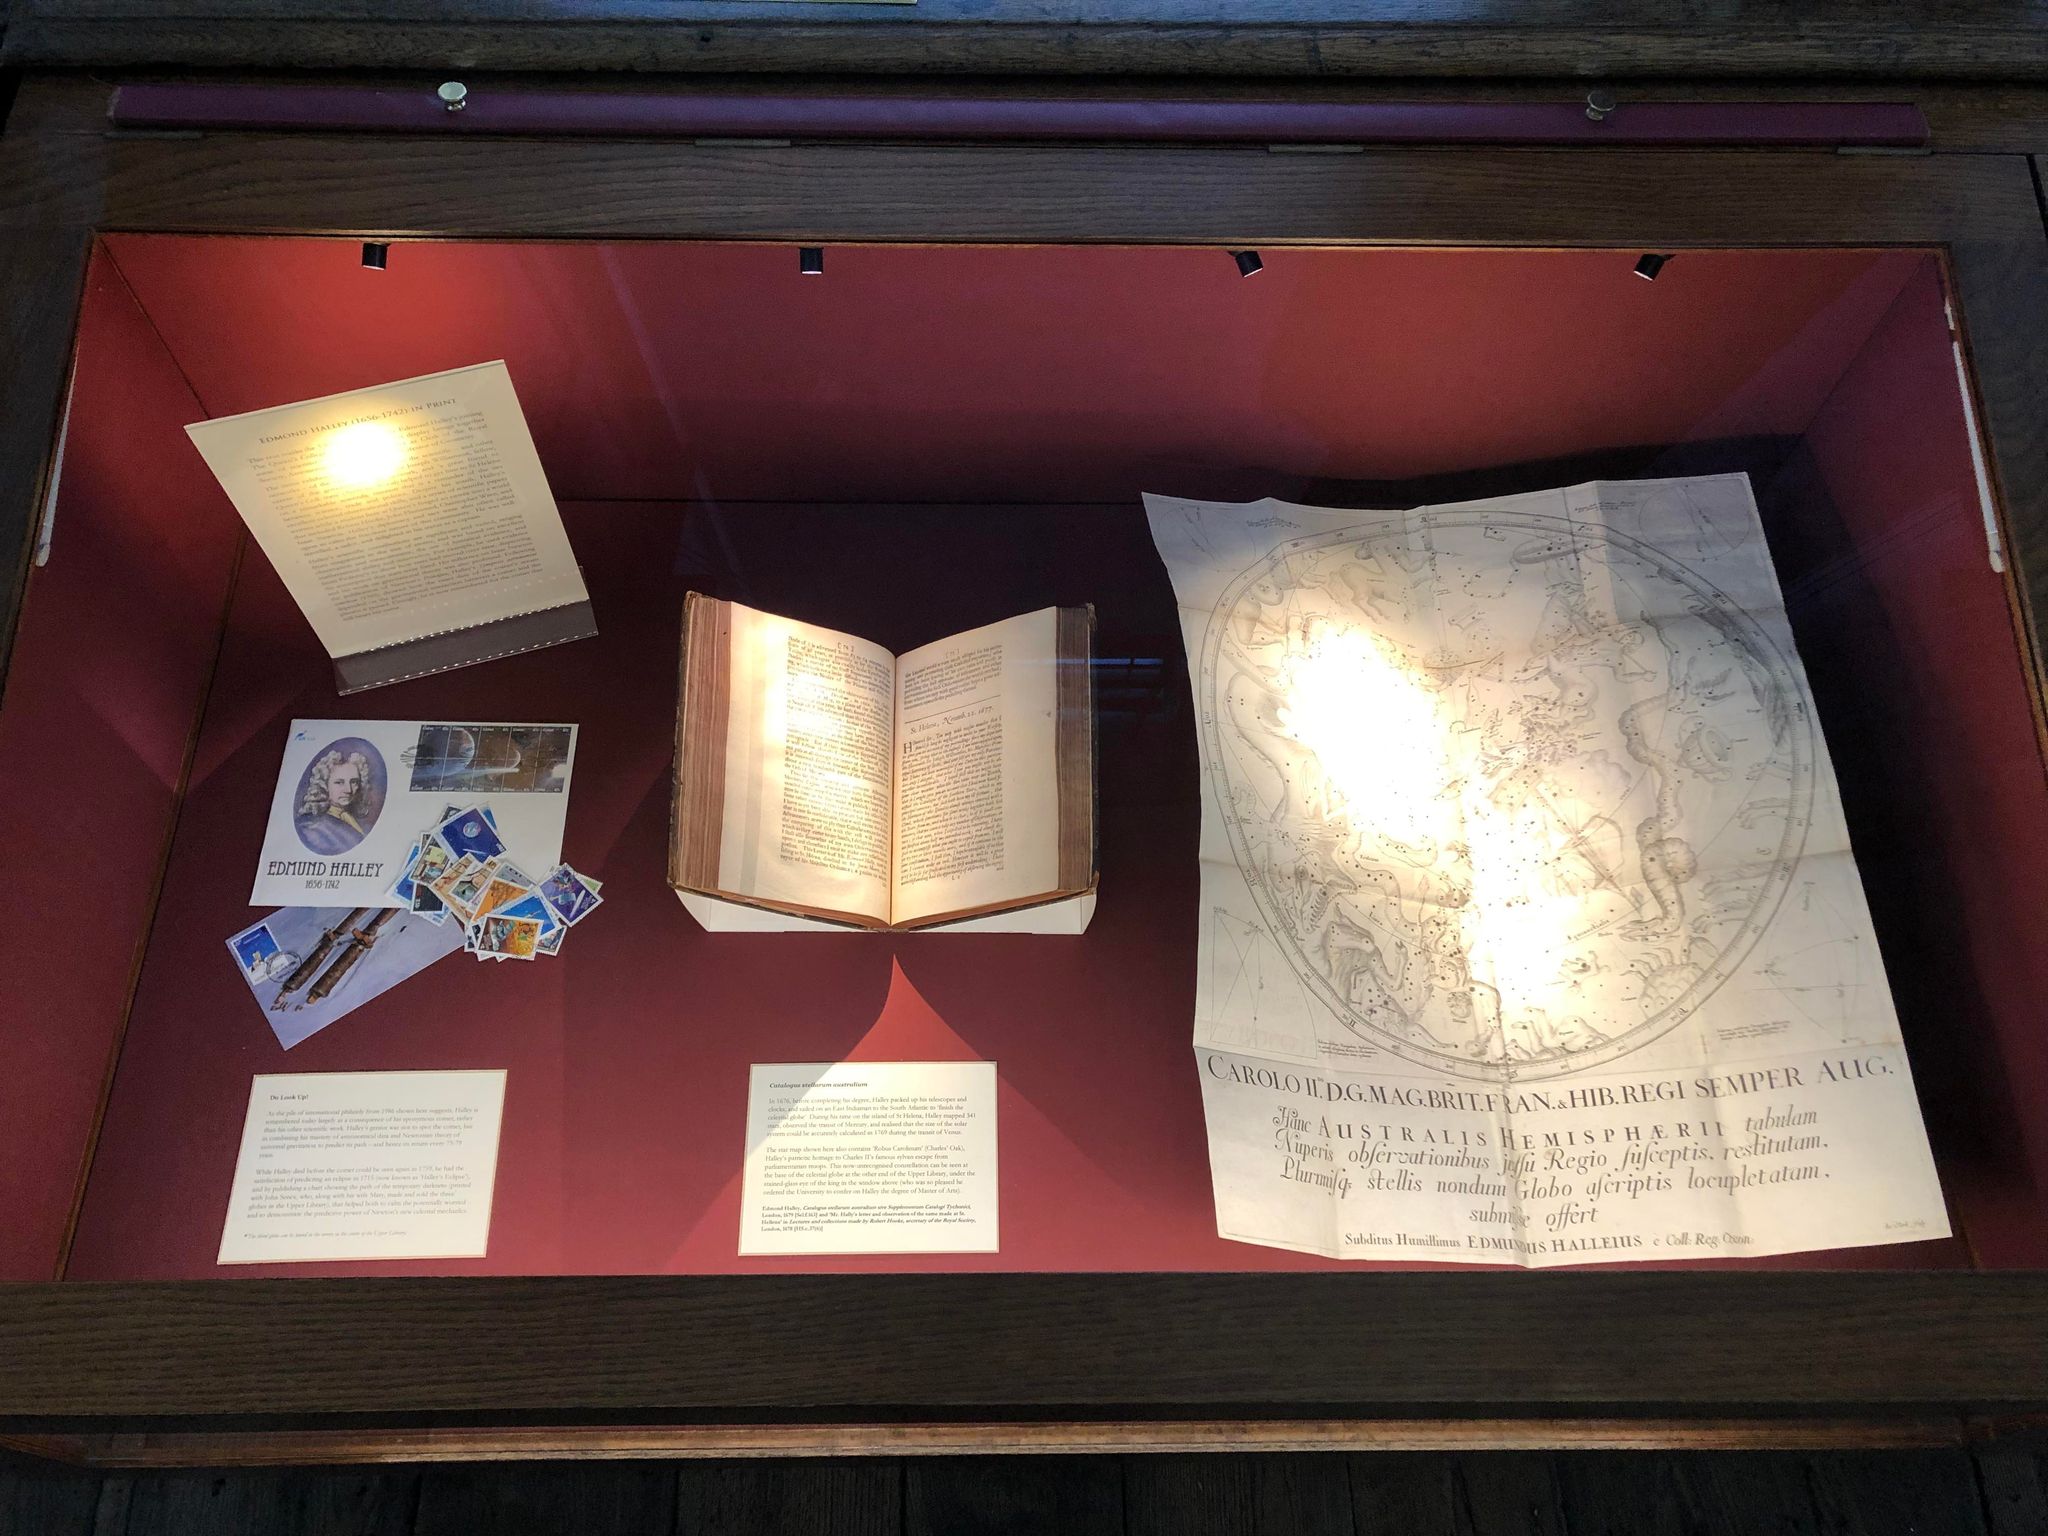 An exhibition case containing ephemera, a mounted book and a large celestial map, plus captions